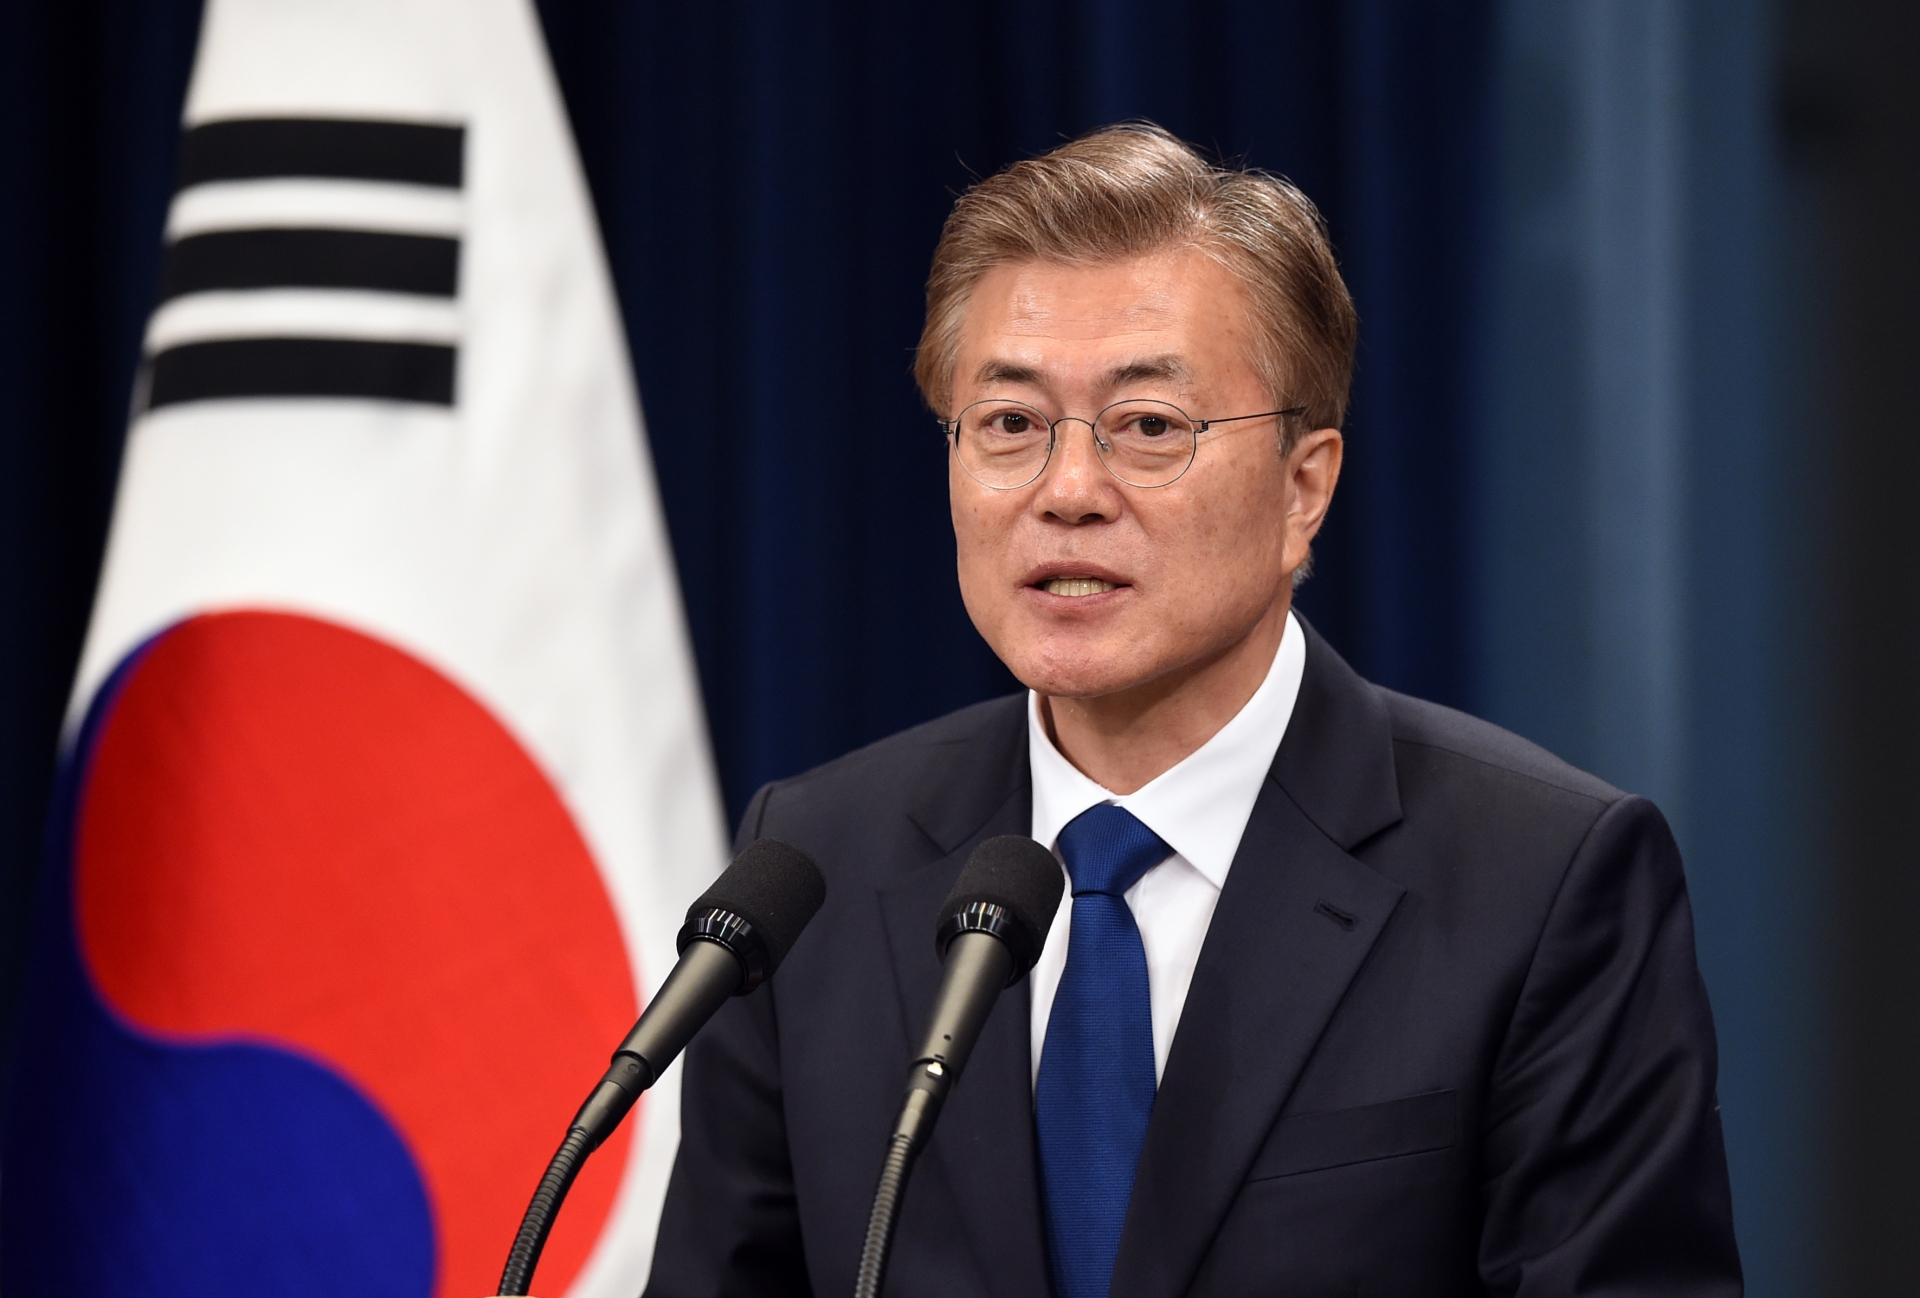 Moon Jae In's Biography: Early Life and Presidency